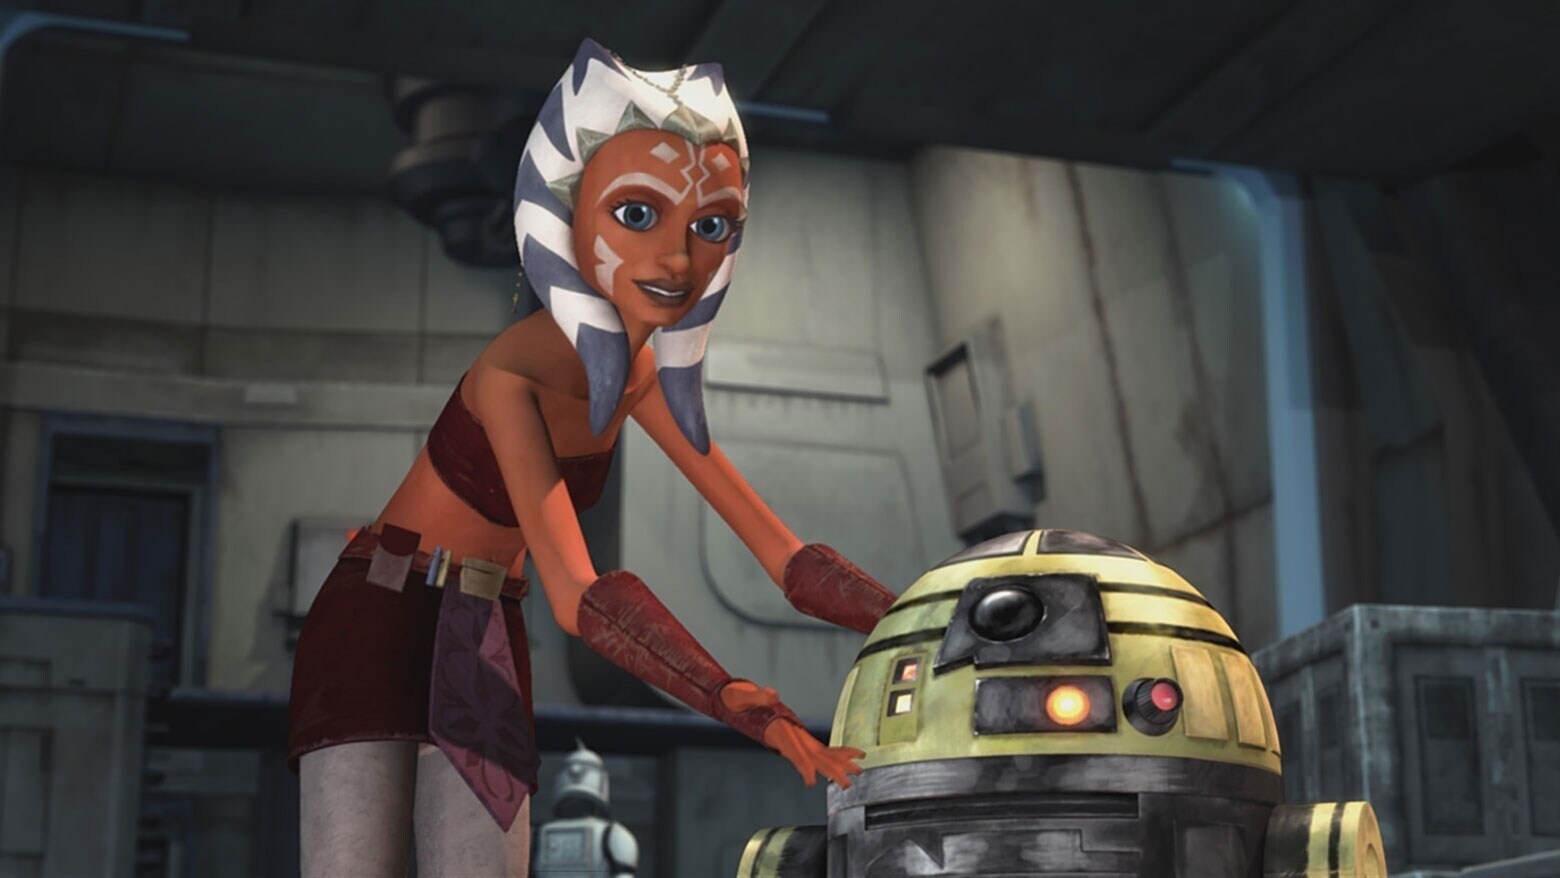 Ahsoka Tano and R2-D2 from The Clone Wars episode, "Downfall of a Droid"